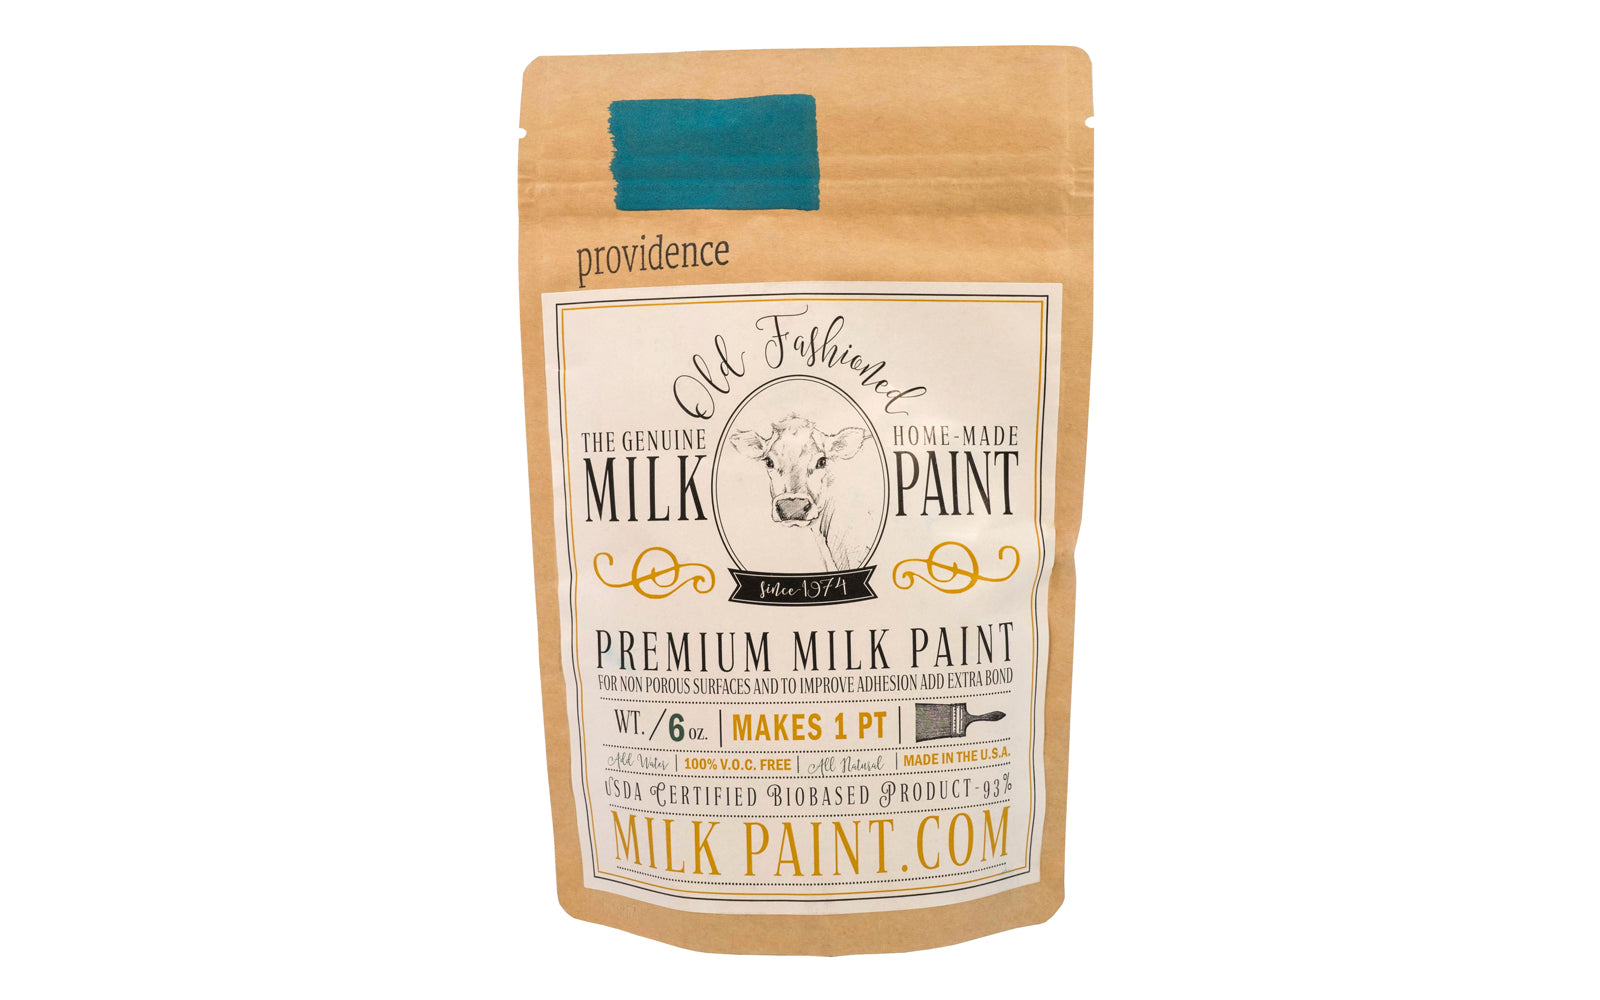 This Milk Paint color is "Providence" - It is a peacock teal blue. Comes in a powder form, you can control how thick/thin you mix the paint. Use it as you would regular paint, thinner for a wash/stain or thicker to create texture. Environmentally safe, non-toxic & is food safe. 100% VOC free. Powder Paint